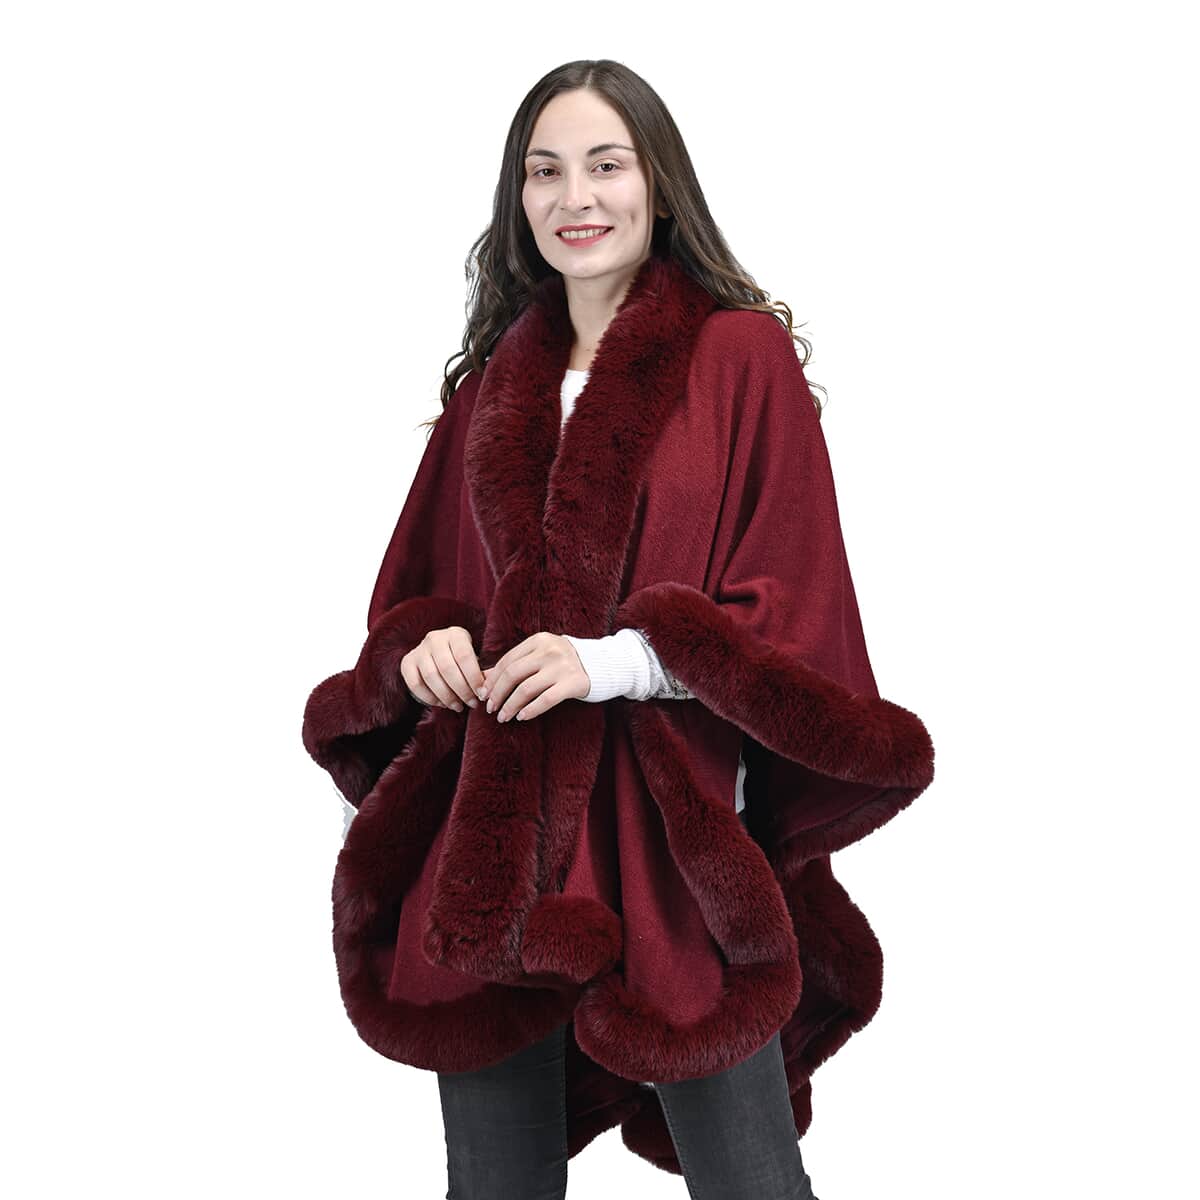 Designer Inspired Burgundy Ruana with Faux Fur Trim - One Size Fits Most image number 0